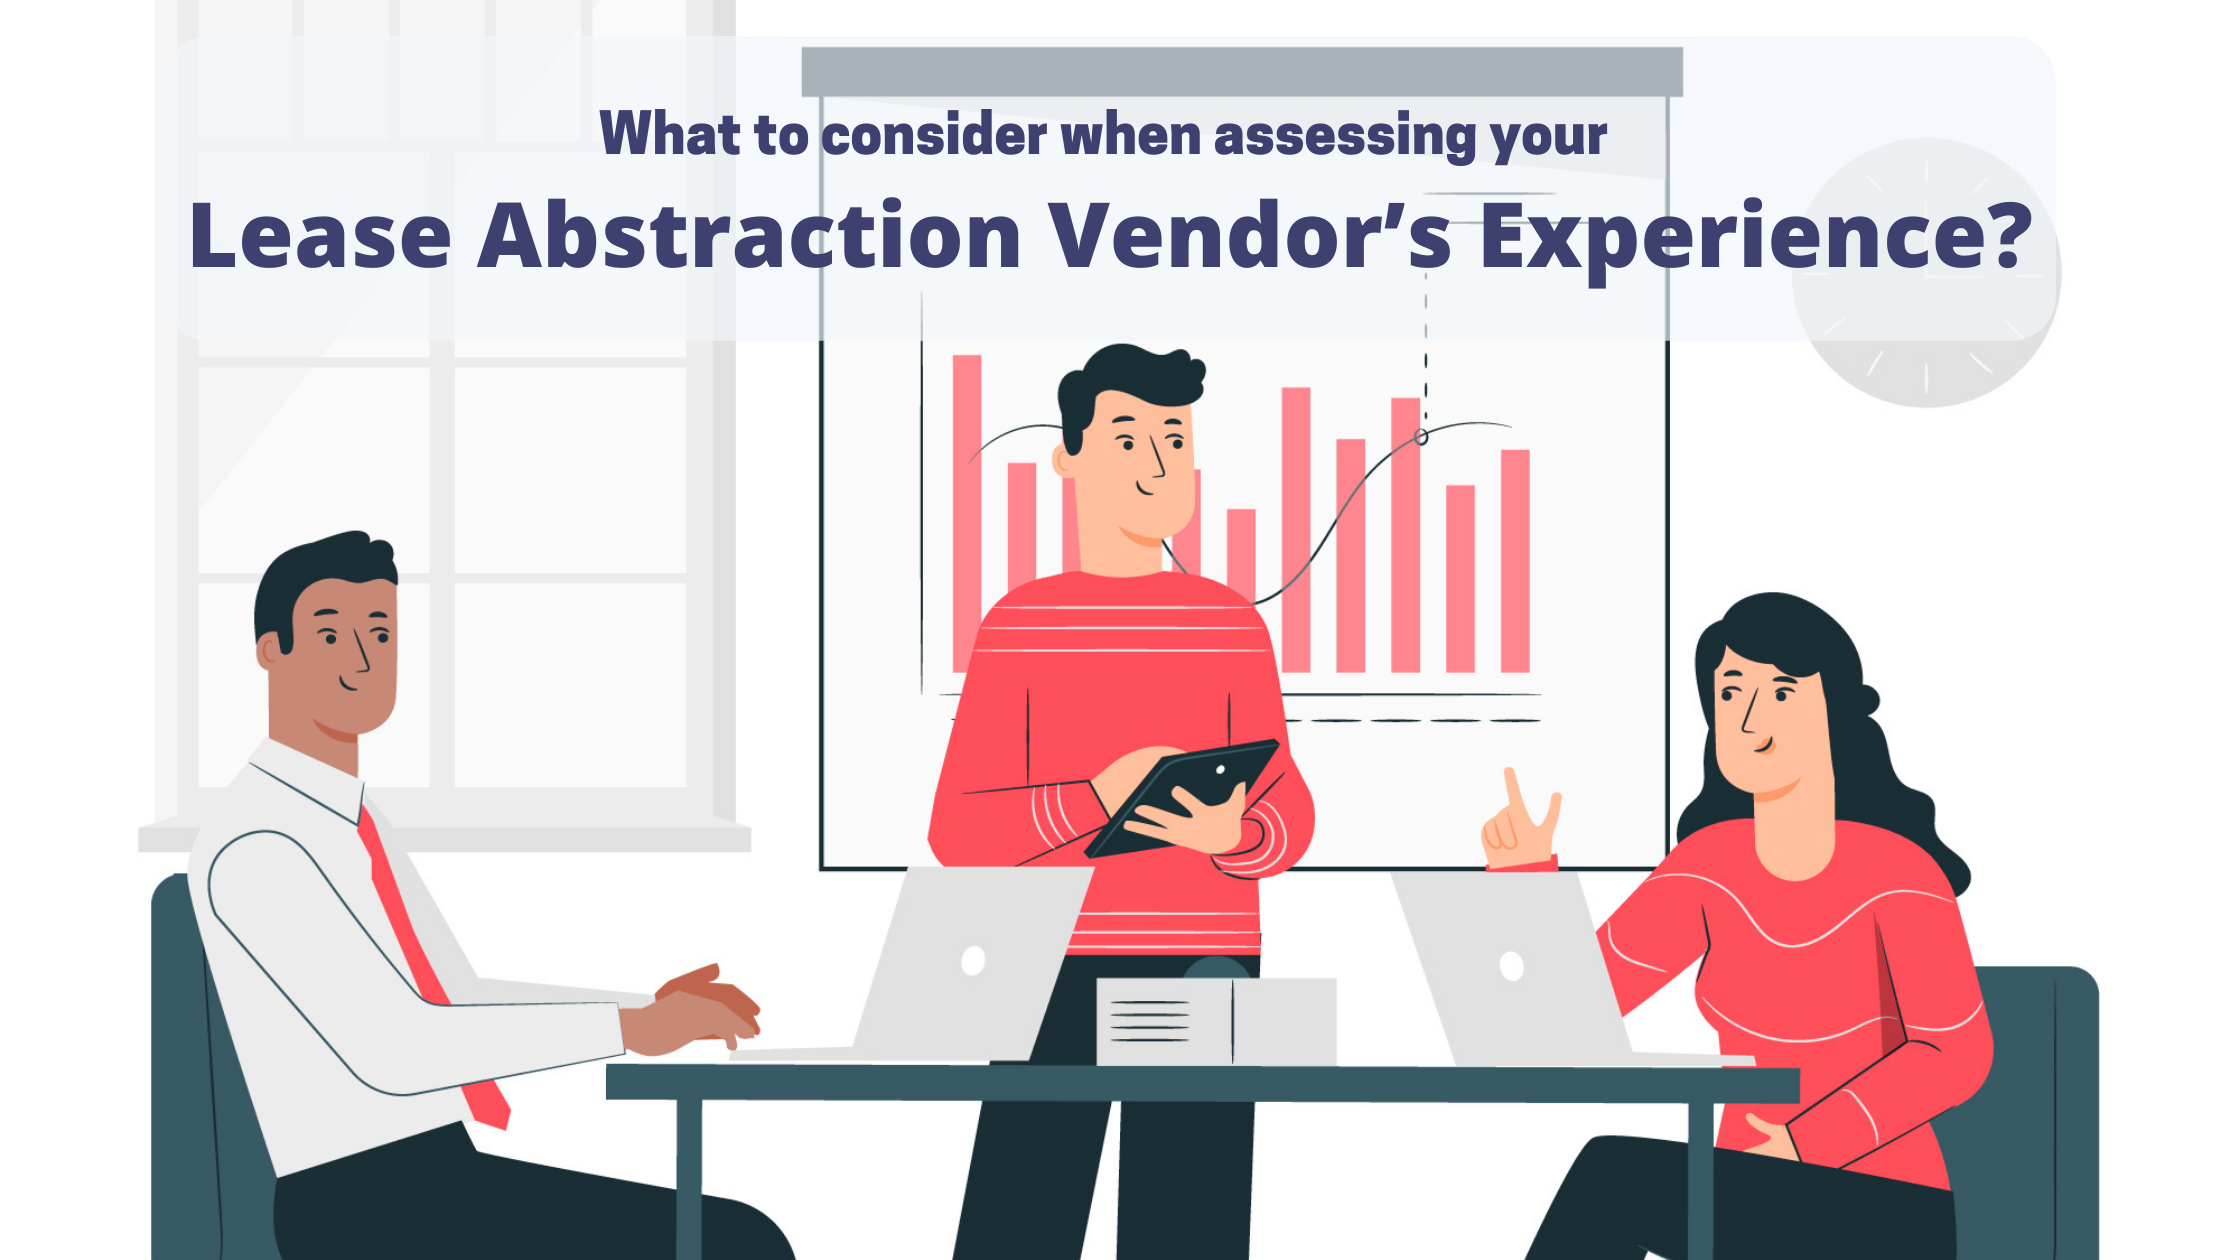 What to consider when assessing your lease abstraction vendor’s experience?